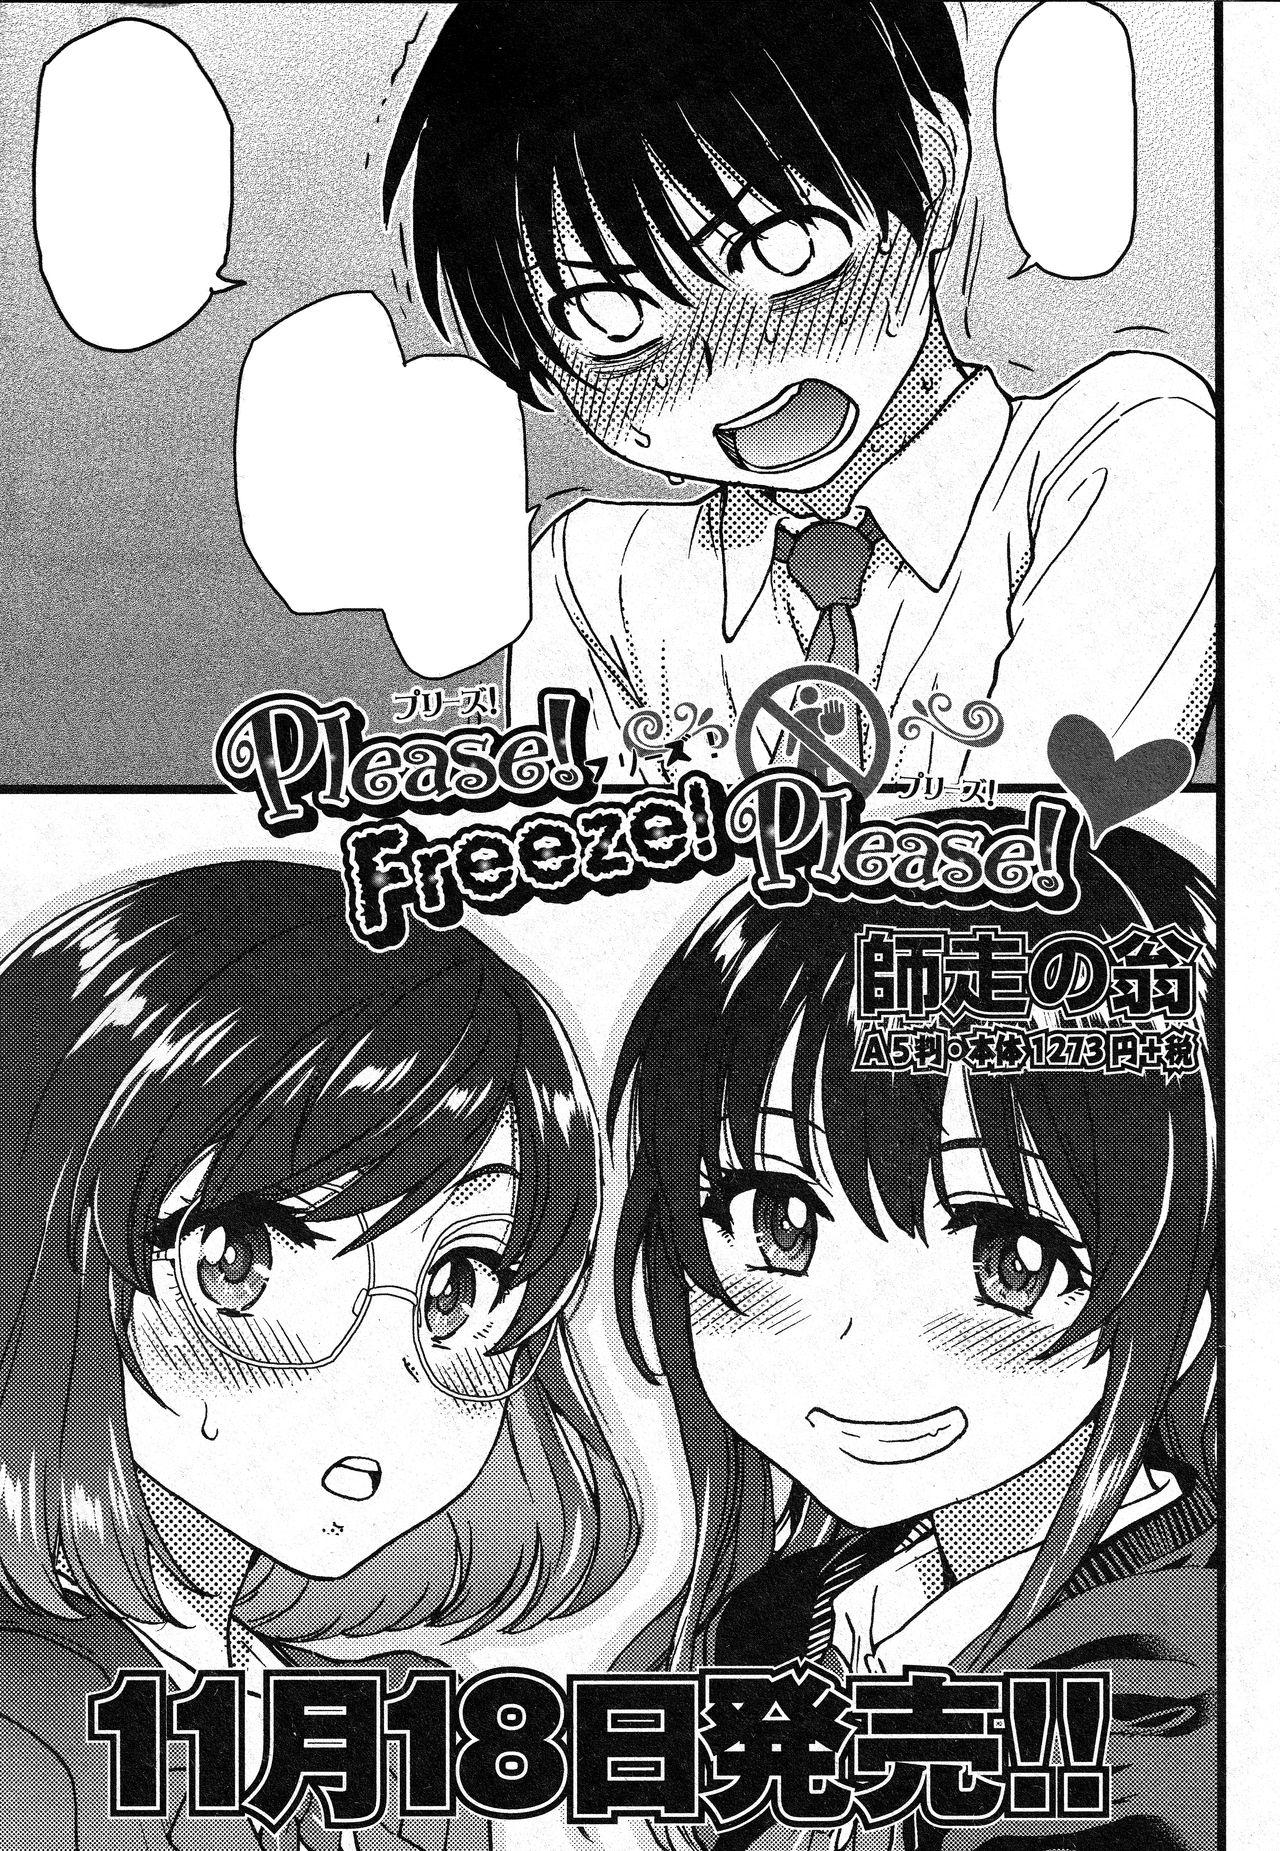 Dykes Please! Freeze! Please! Saishuuwa Family Roleplay - Page 73